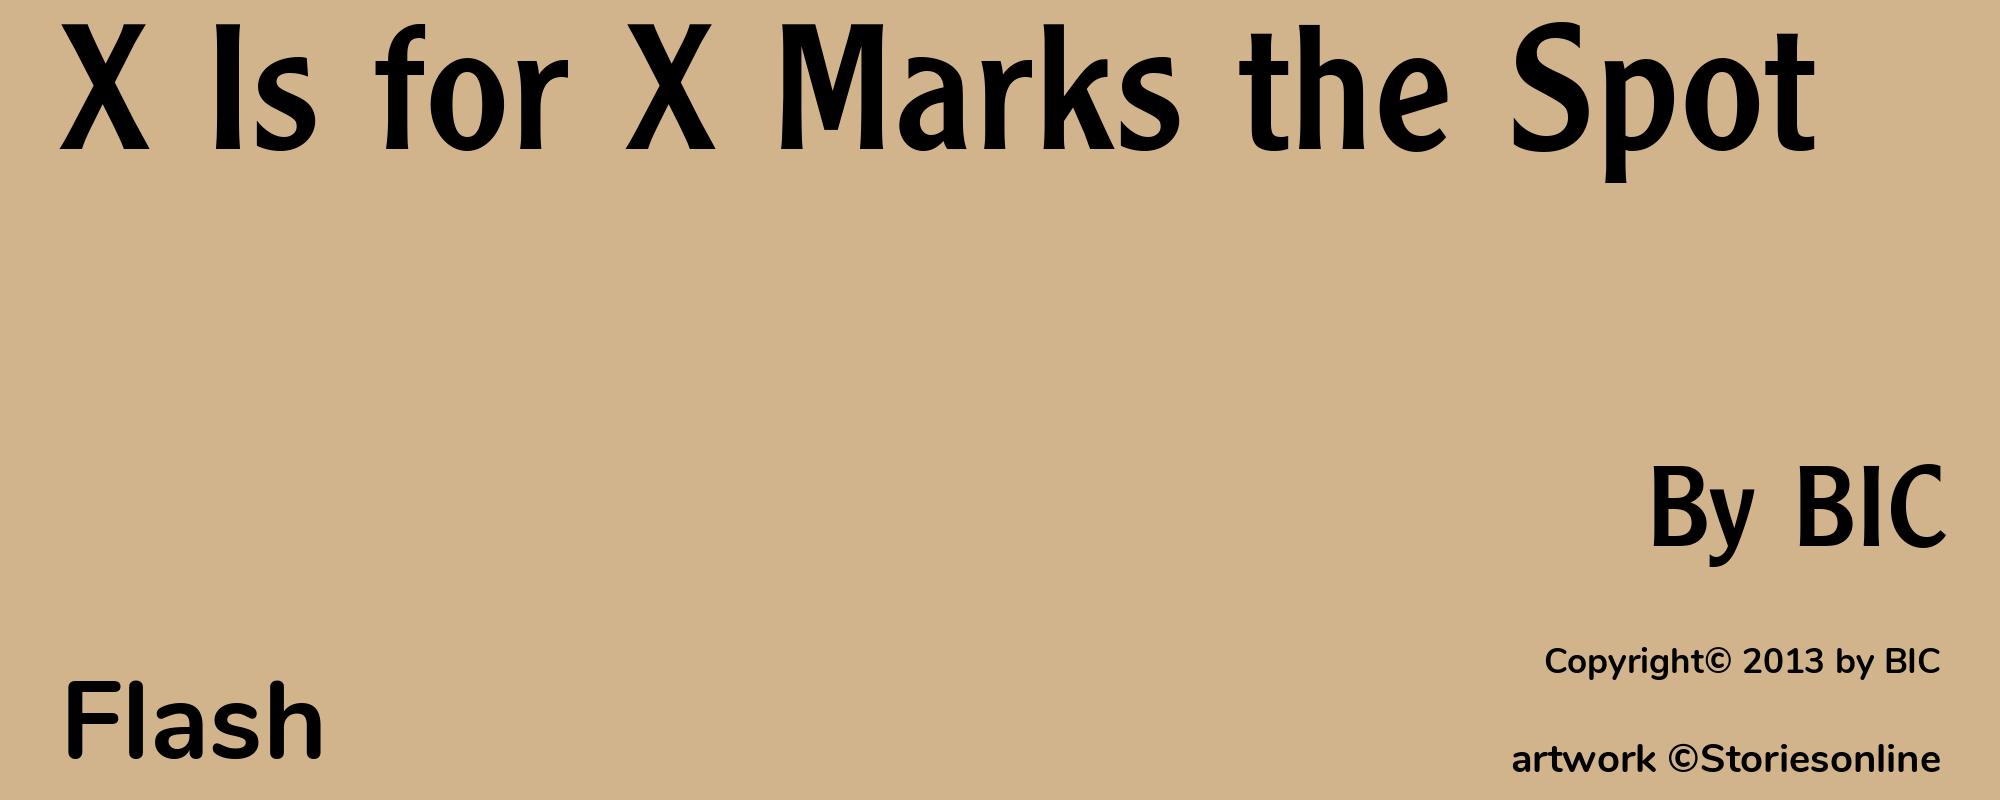 X Is for X Marks the Spot - Cover